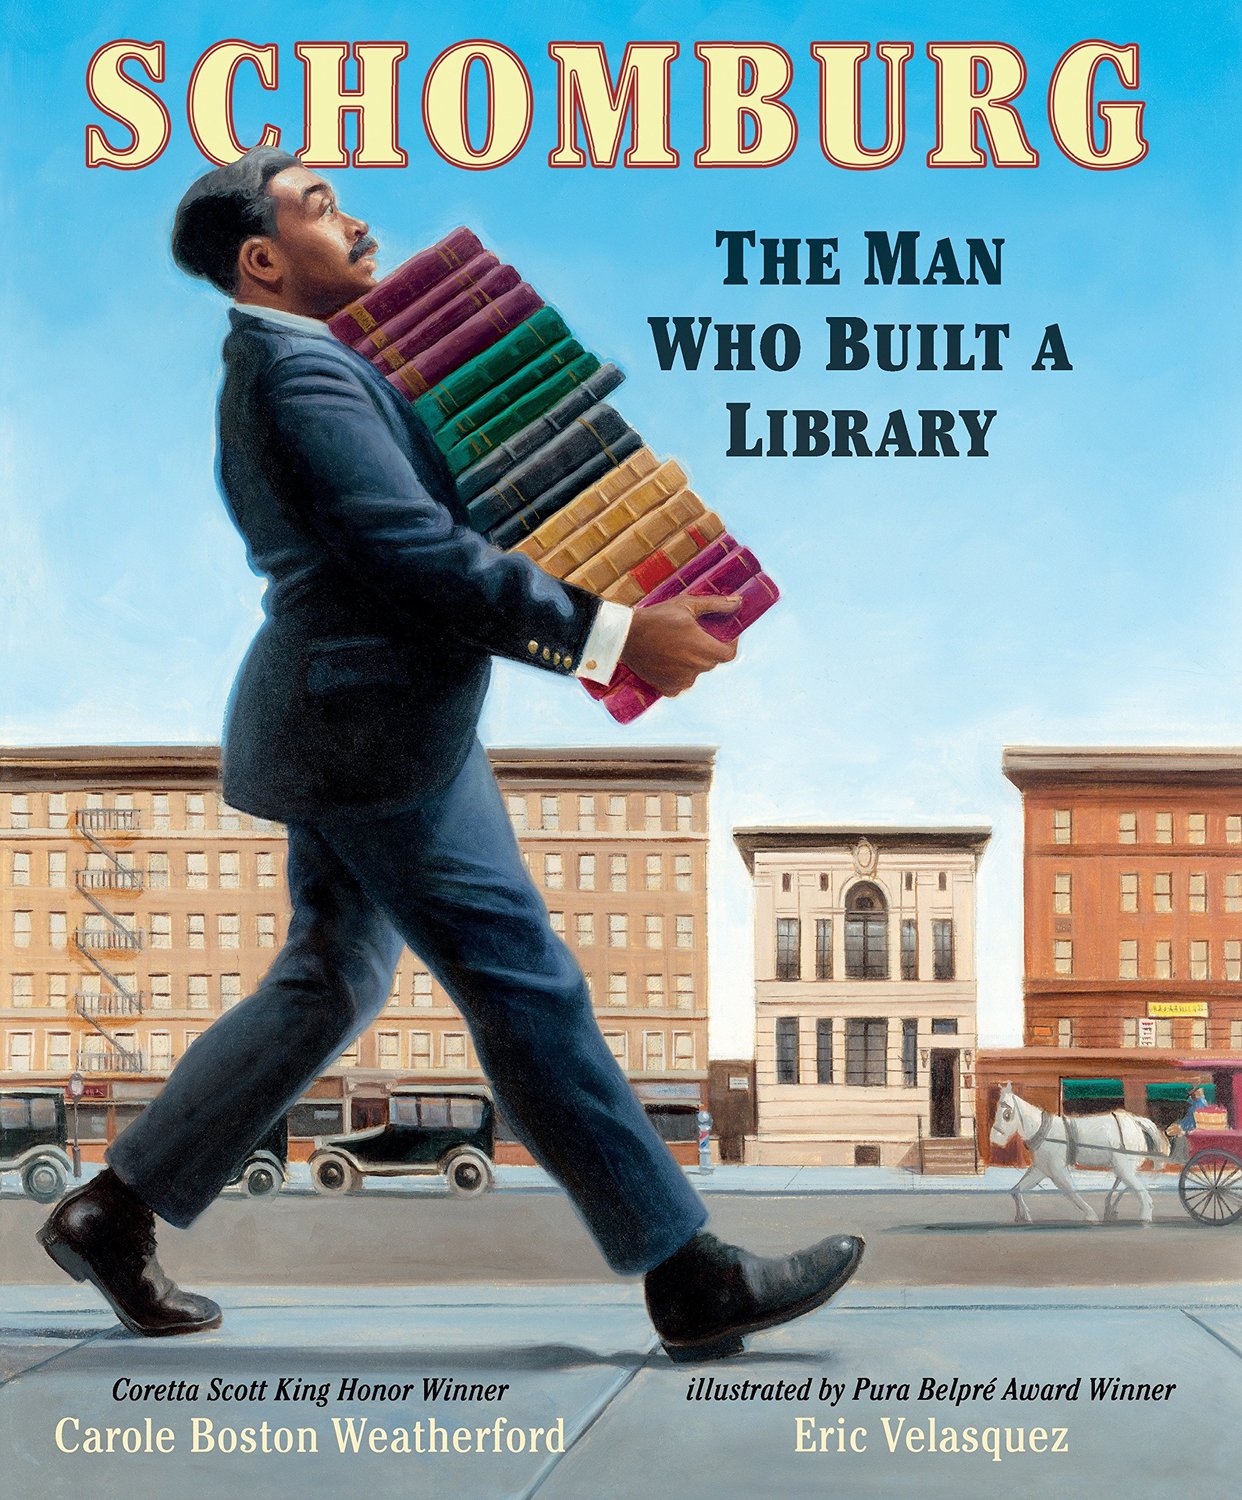 “Schomburg: The Man Who Built a Library’’ by Carole Boston Weatherford